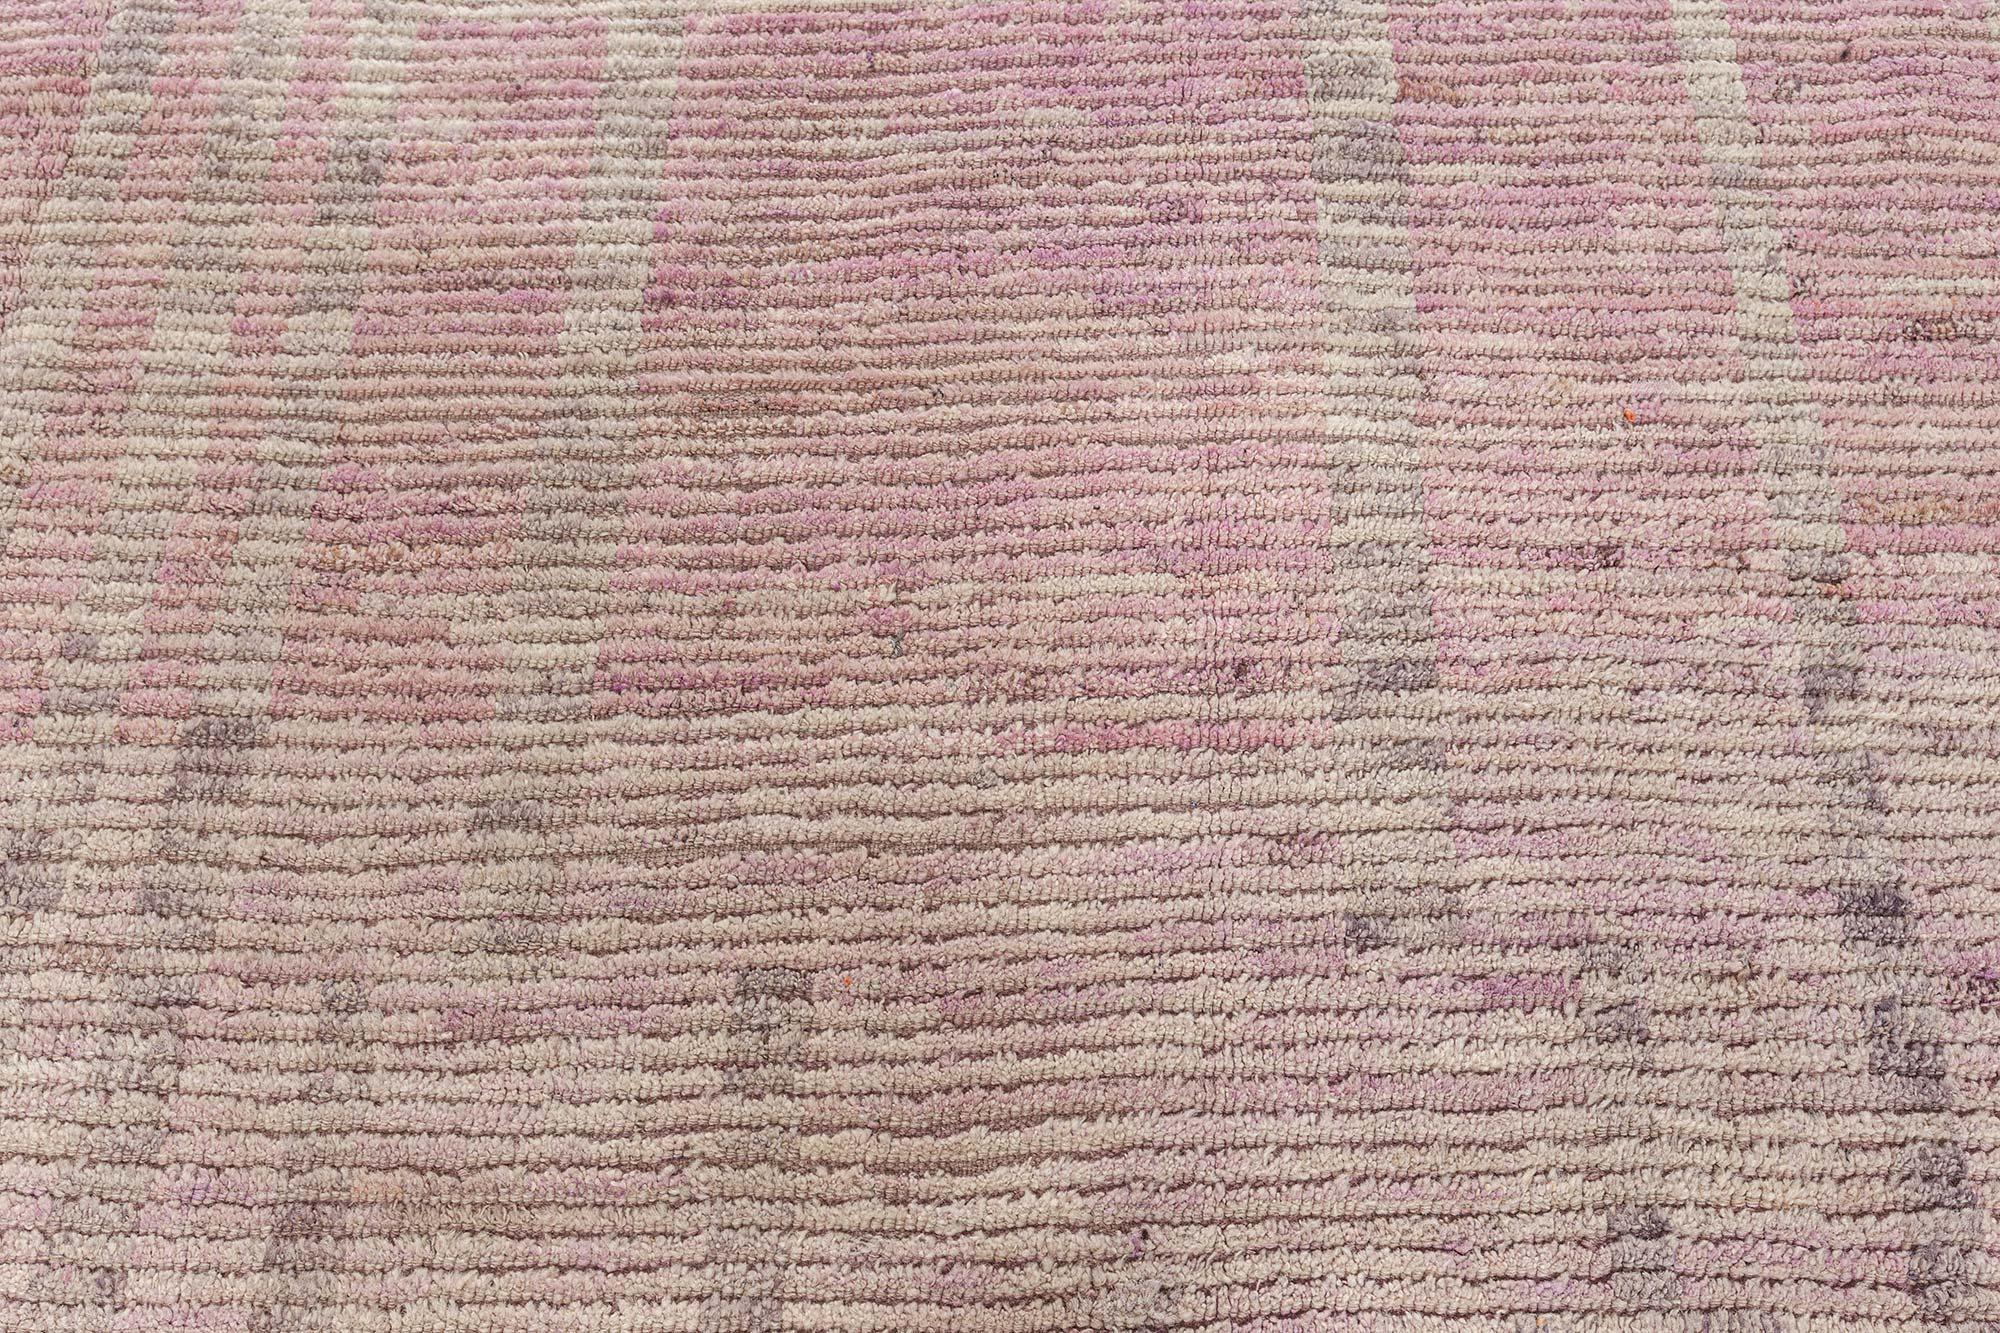 Tribal Style Moroccan rug in shades of pink by Doris Leslie Blau
Size: 13'10